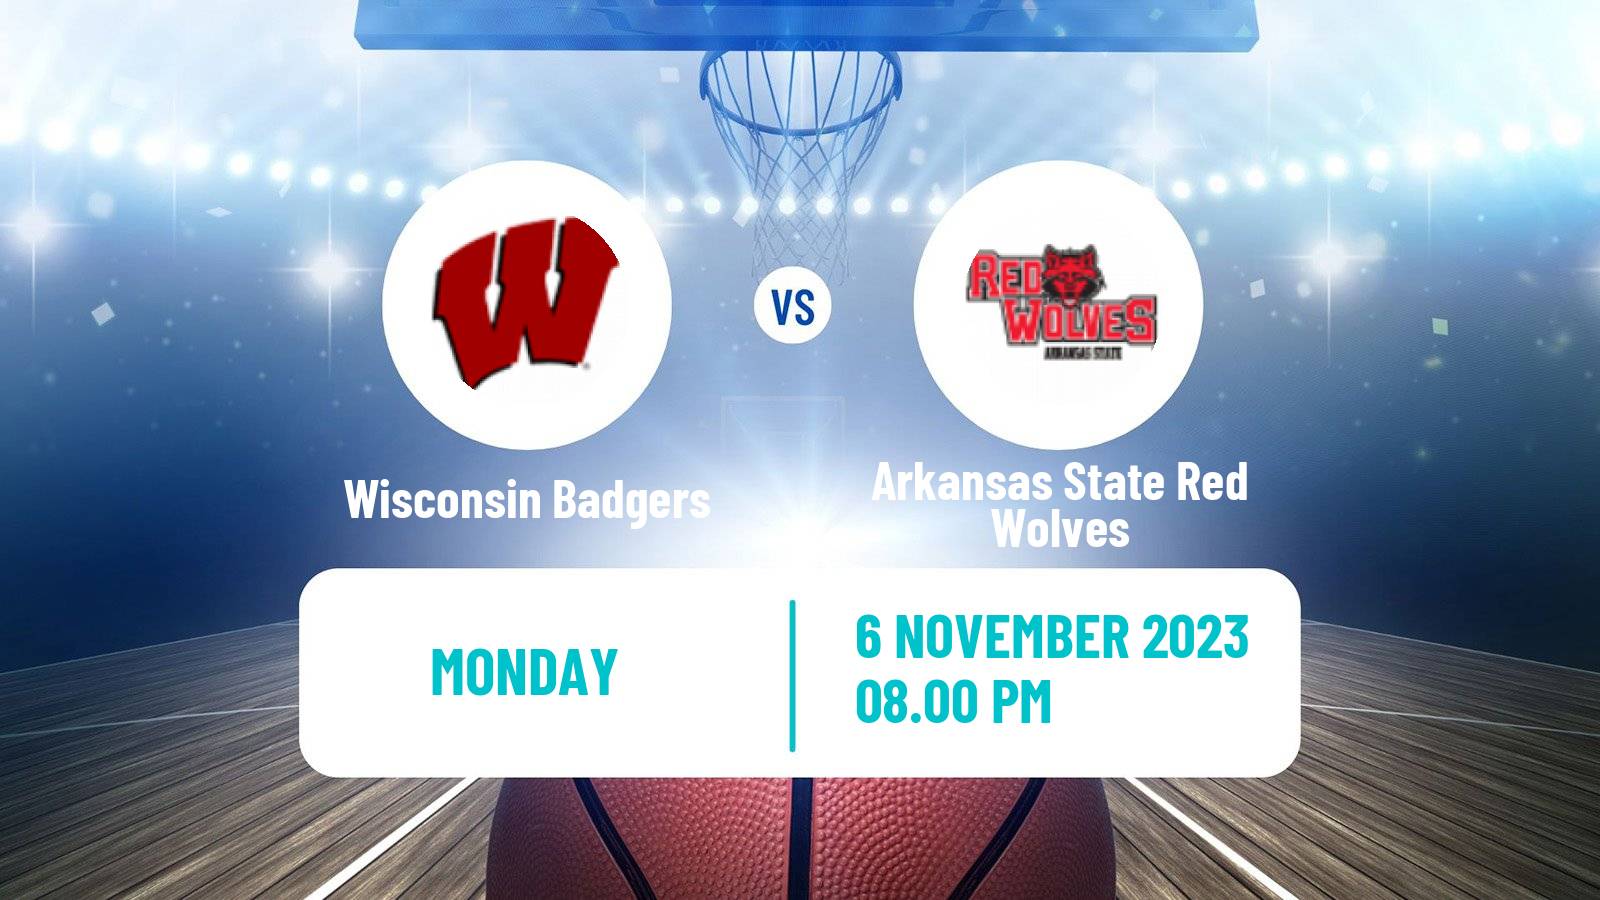 Basketball NCAA College Basketball Wisconsin Badgers - Arkansas State Red Wolves